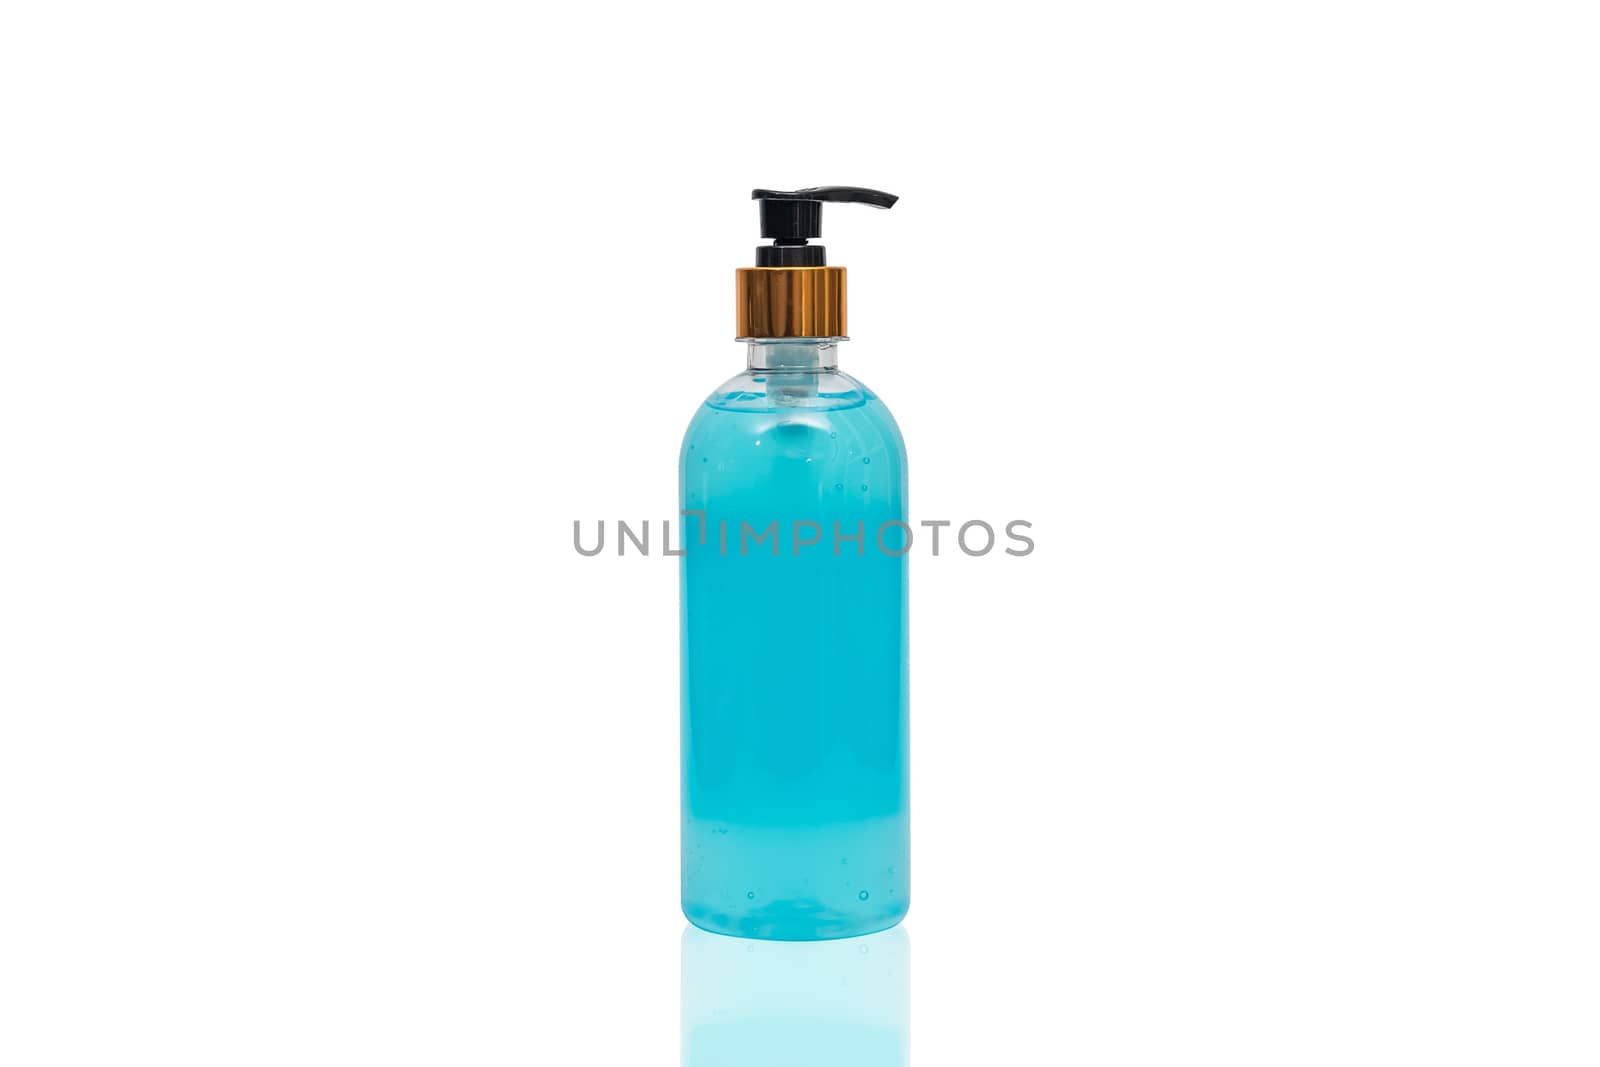 hand sanitizer alcohol blue gel in transparent plastic bottle pump isolated on white background for disinfection, prevent spread of germs during infections of COVID-19 Coronavirus outbreak situation